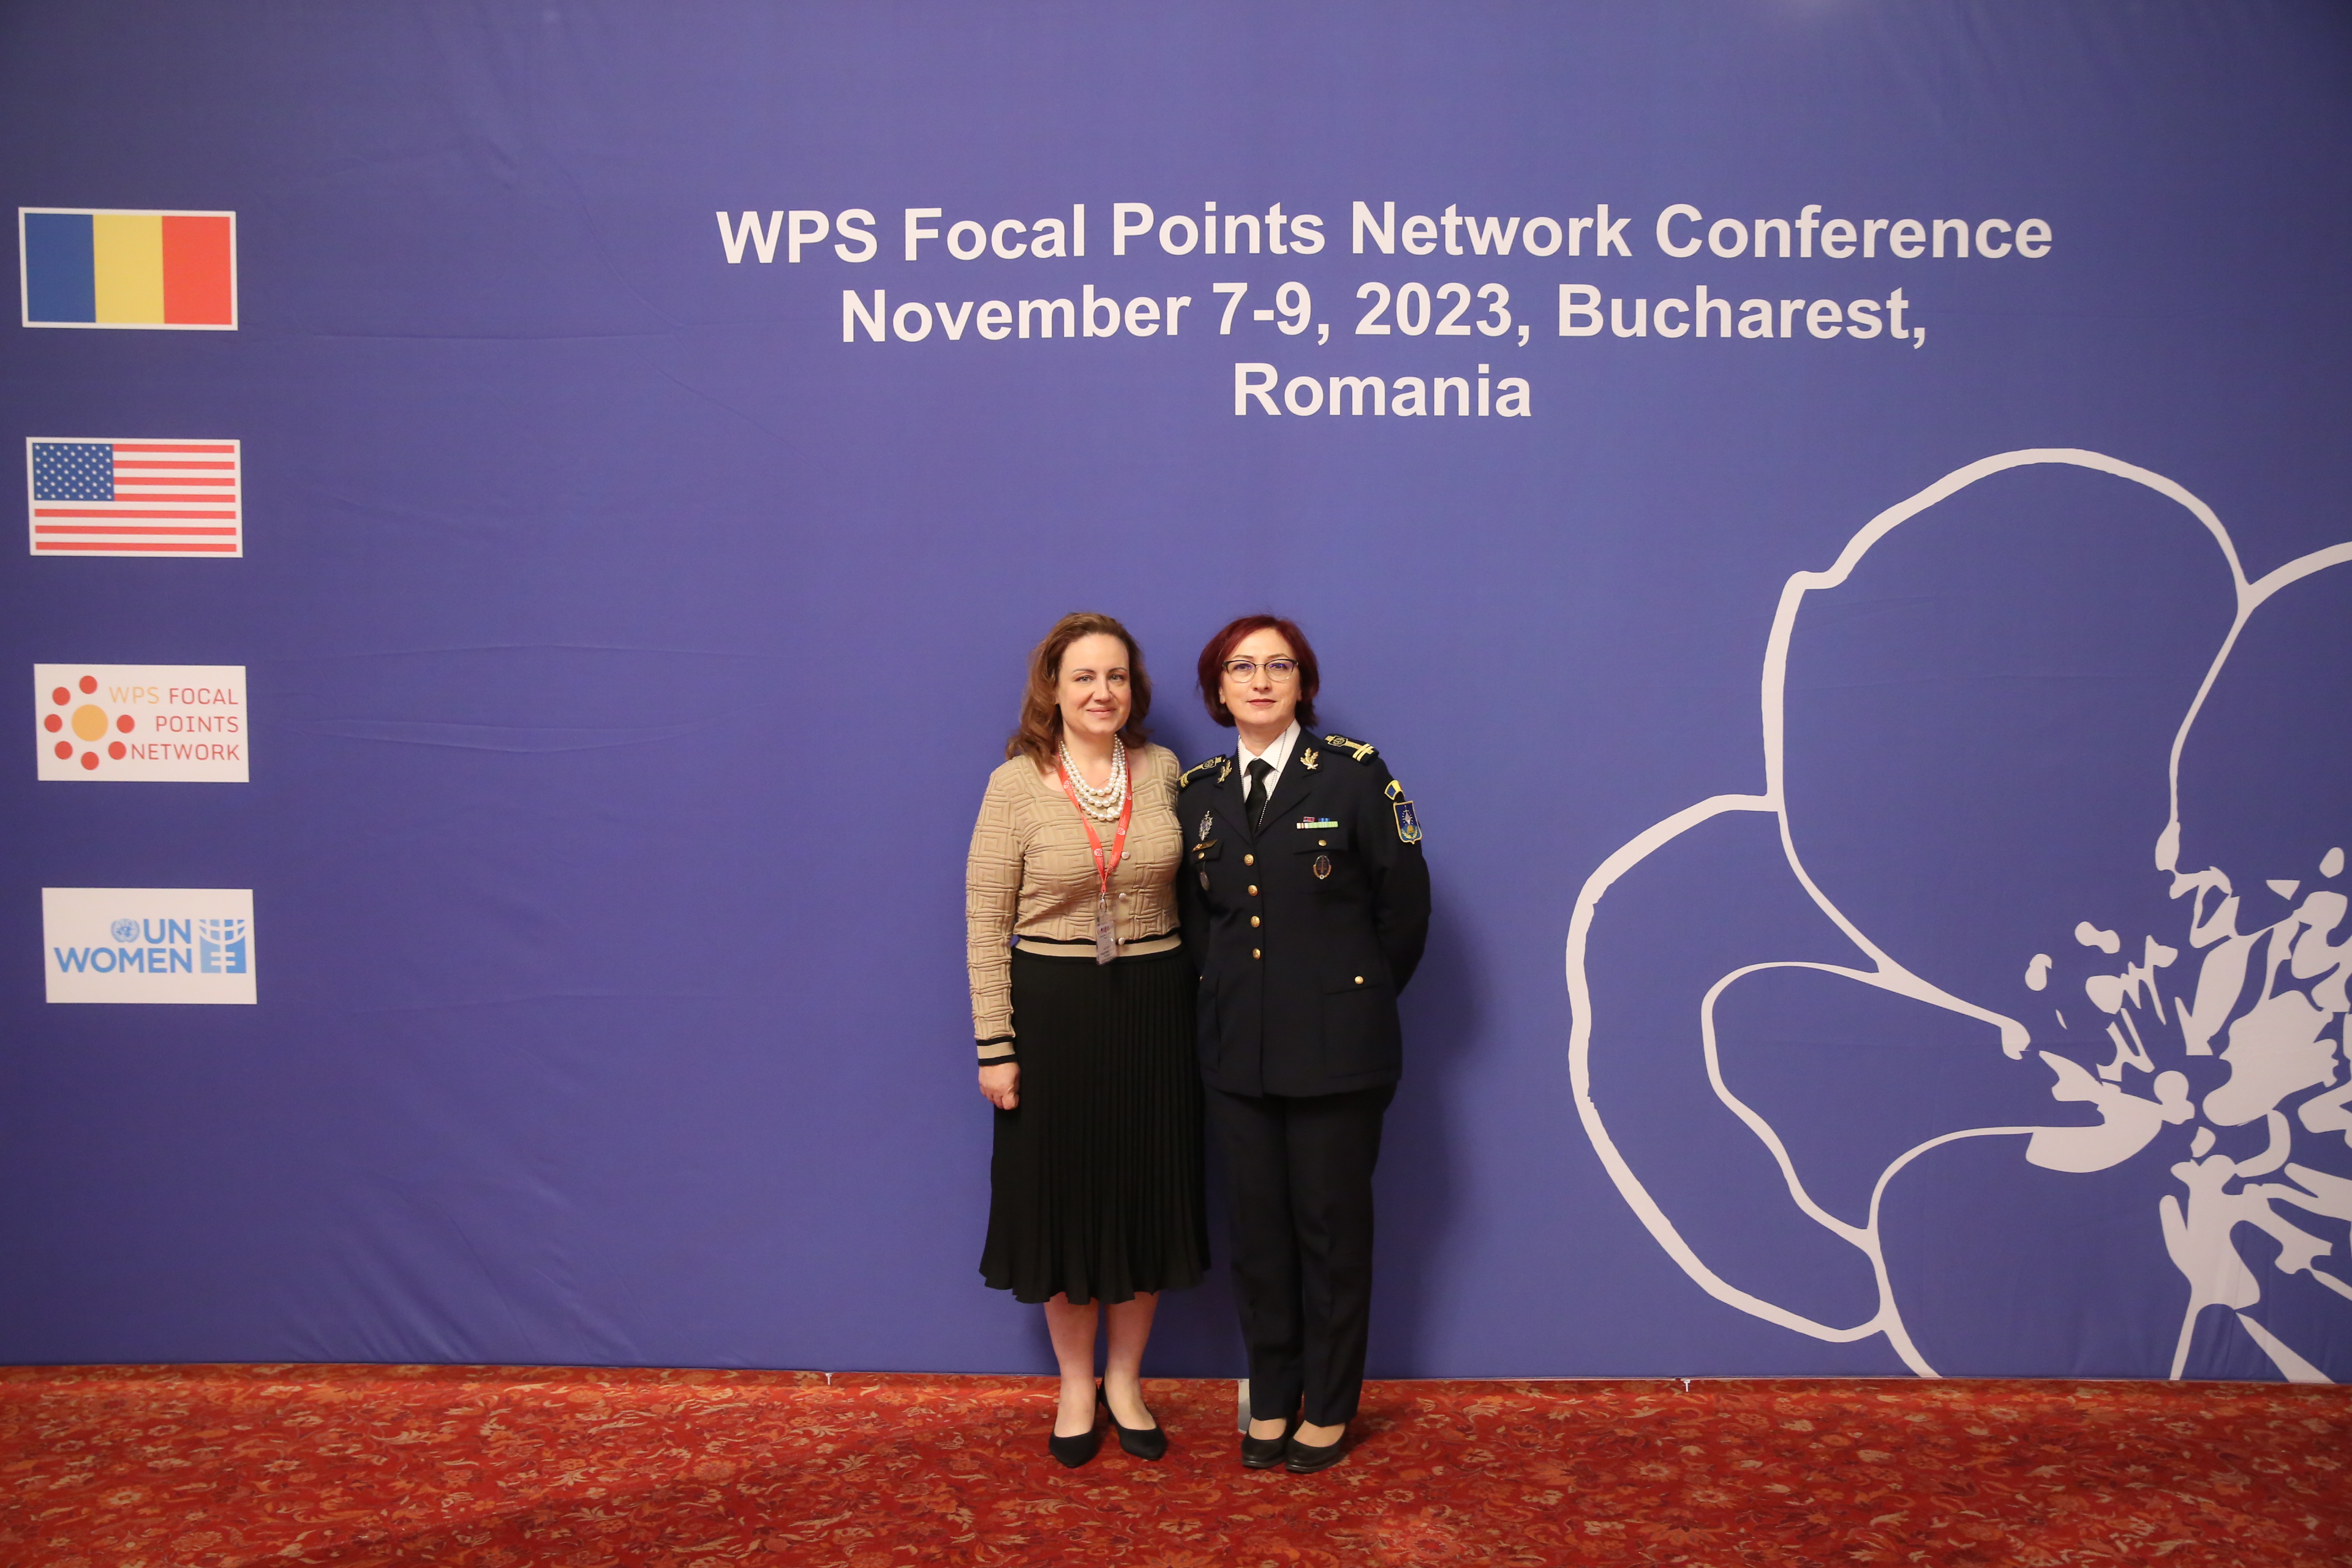 WPS Focal Points Network Conference, on 7-9 Nov. 2023